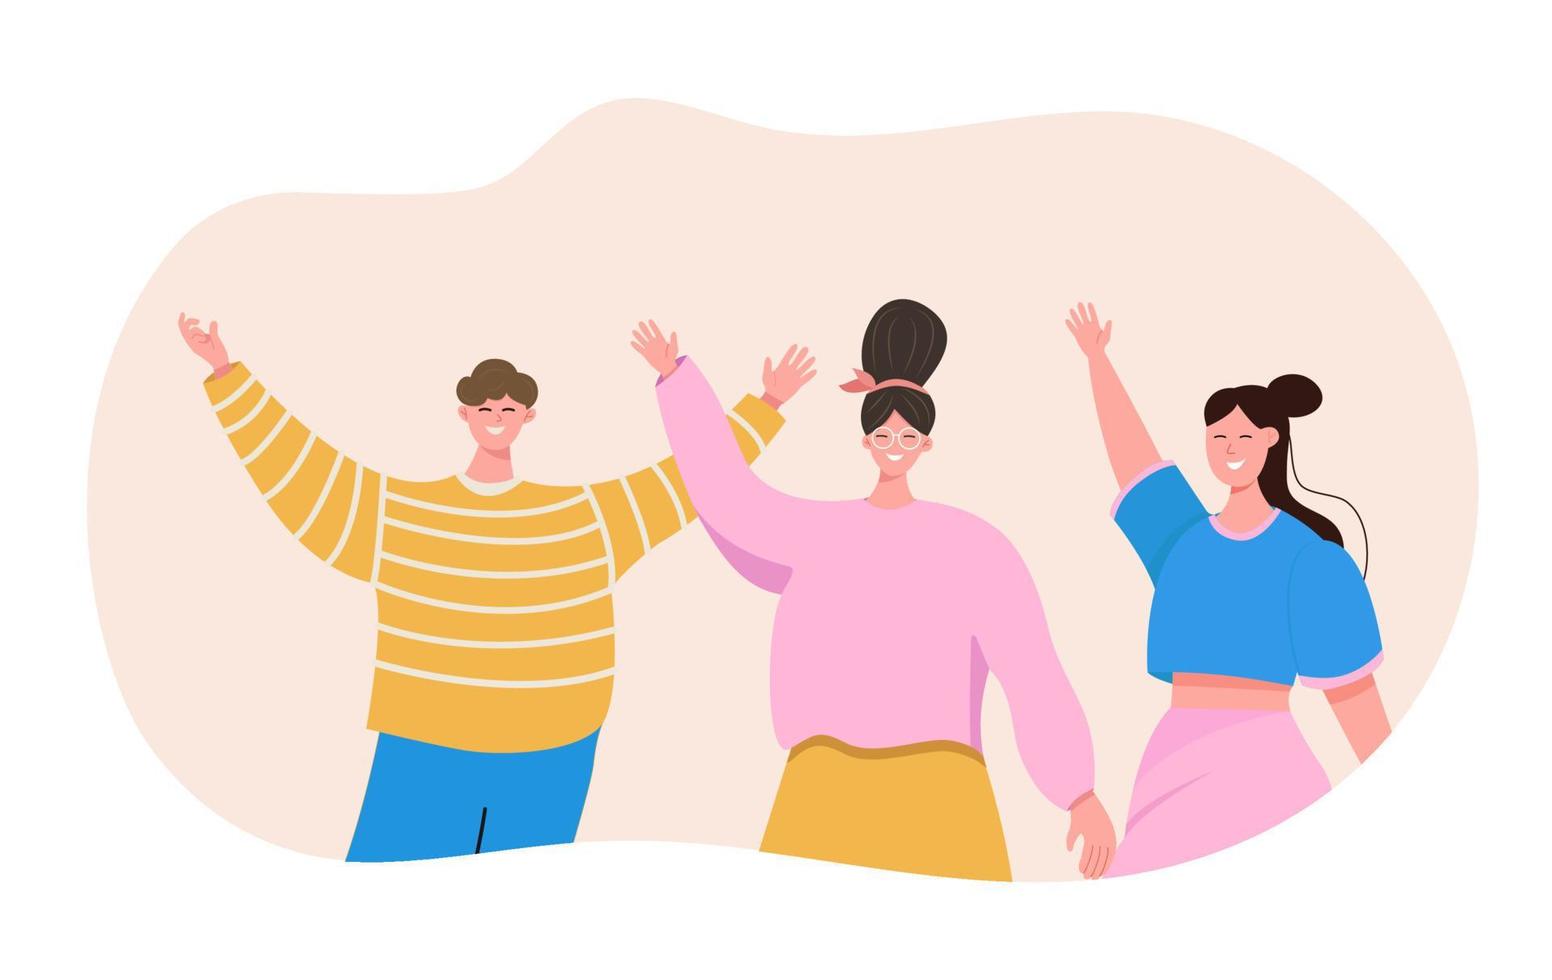 Set of people celebrating win or goal achievement. Happy team or group of friends with hands up isolated on white background. Concept of victory and success. Vector illustration in flat cartoon style